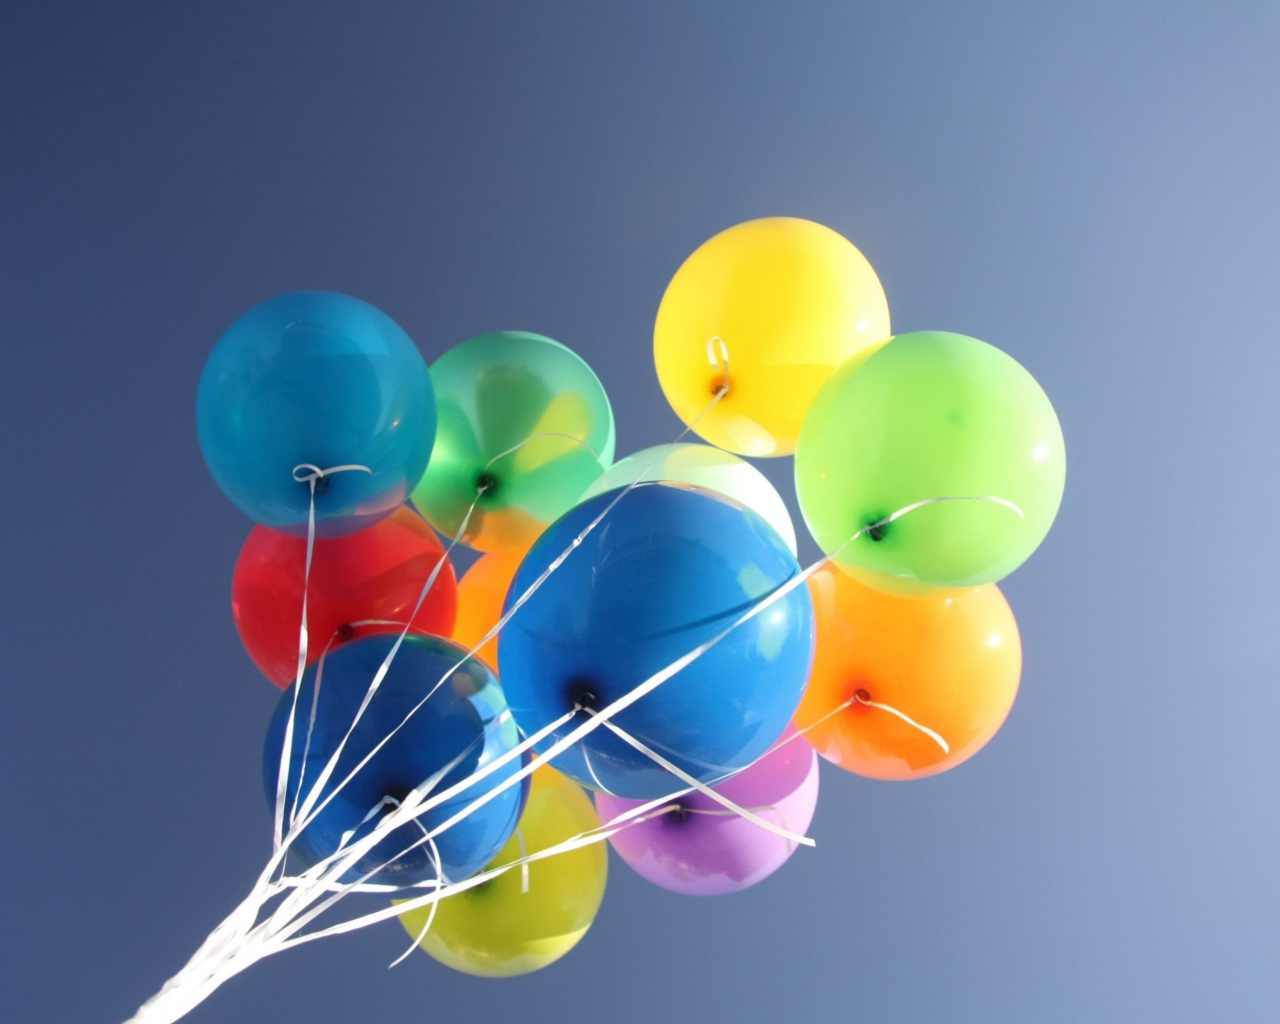 Colorful Balloons wallpaper 1280x1024